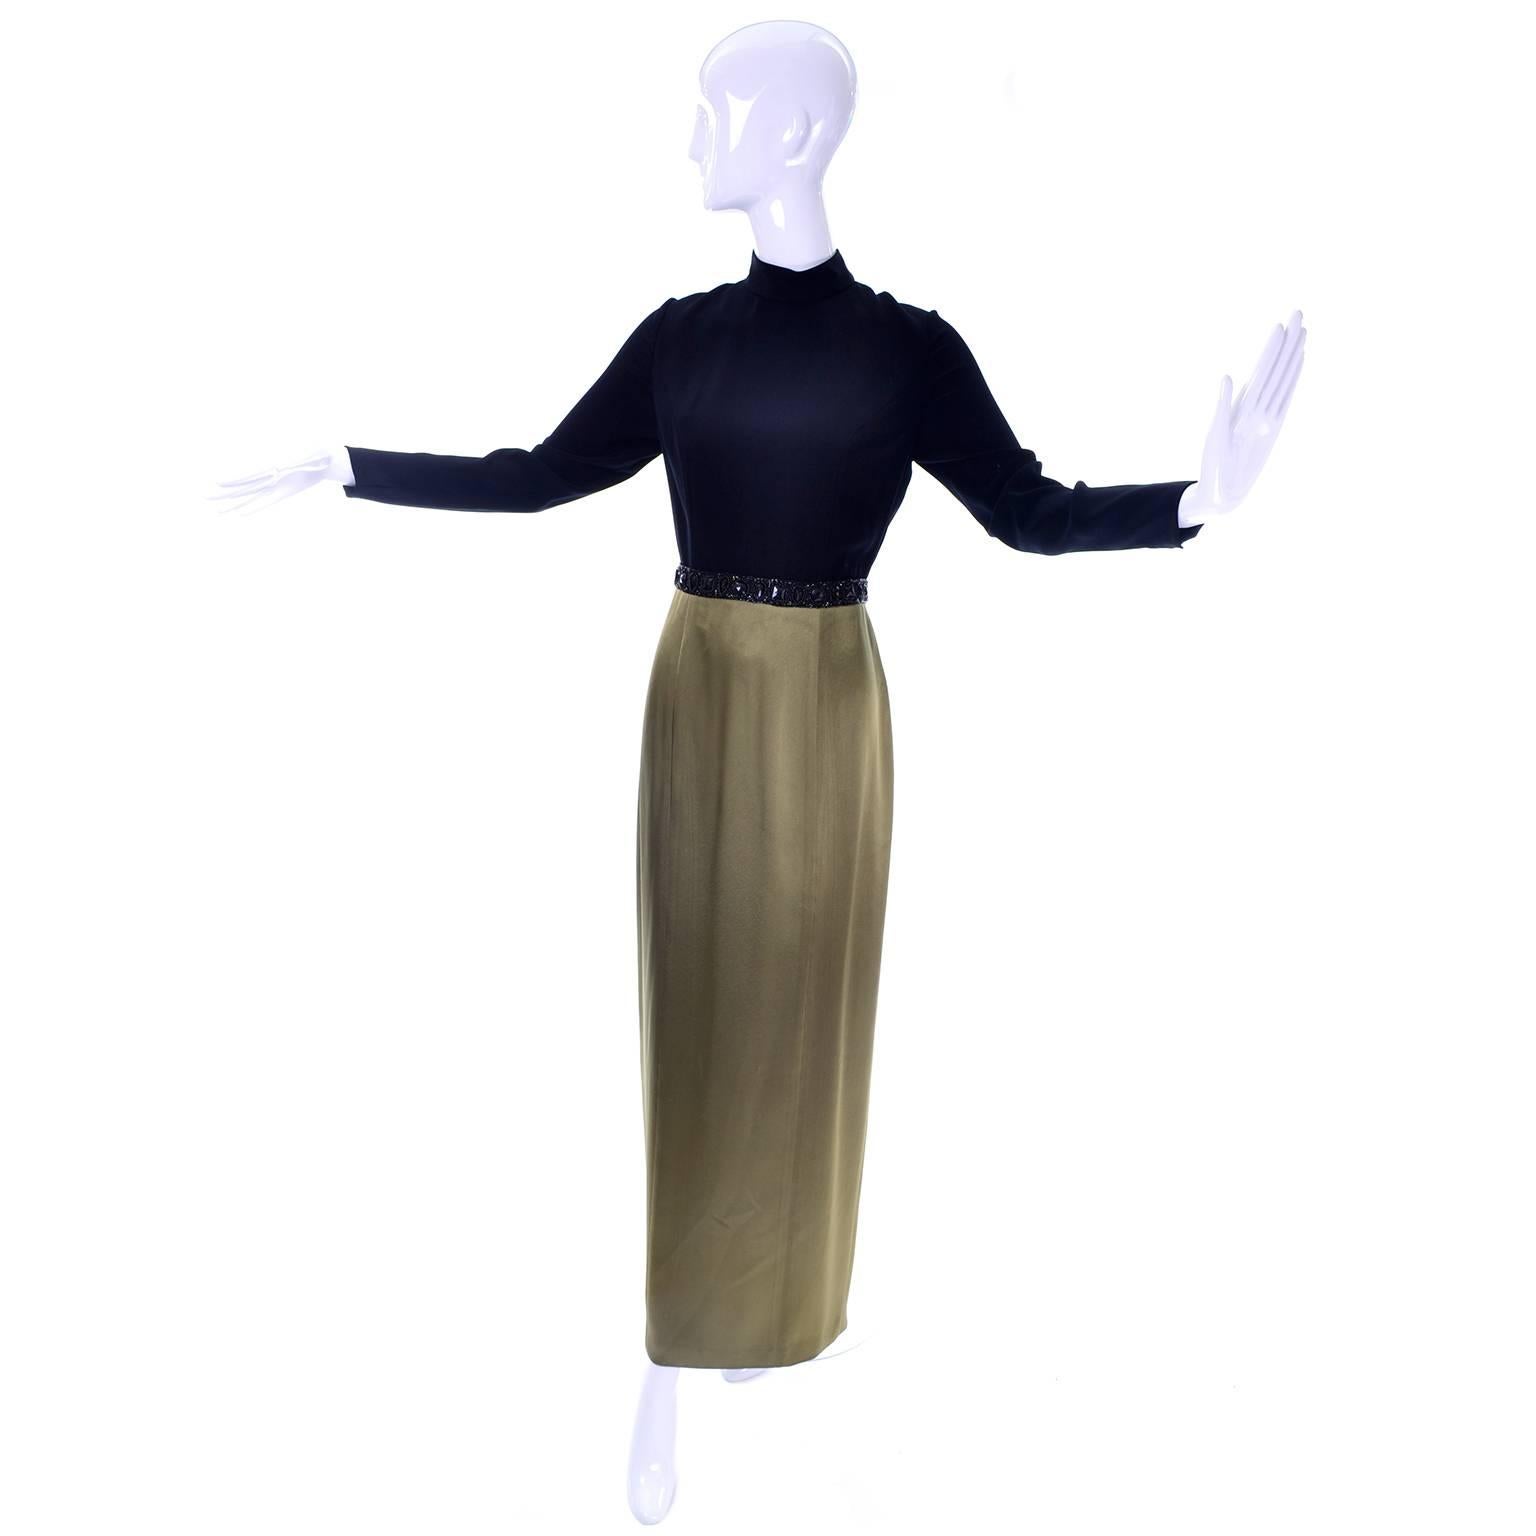 This Bob Mackie boutique vintage maxi dress has a black top and an olive green satin skirt. The waist is adorned with black beads and gemstones. There is a sensational diamond shaped open back, with layered fabric and a clasp at the high neck, and